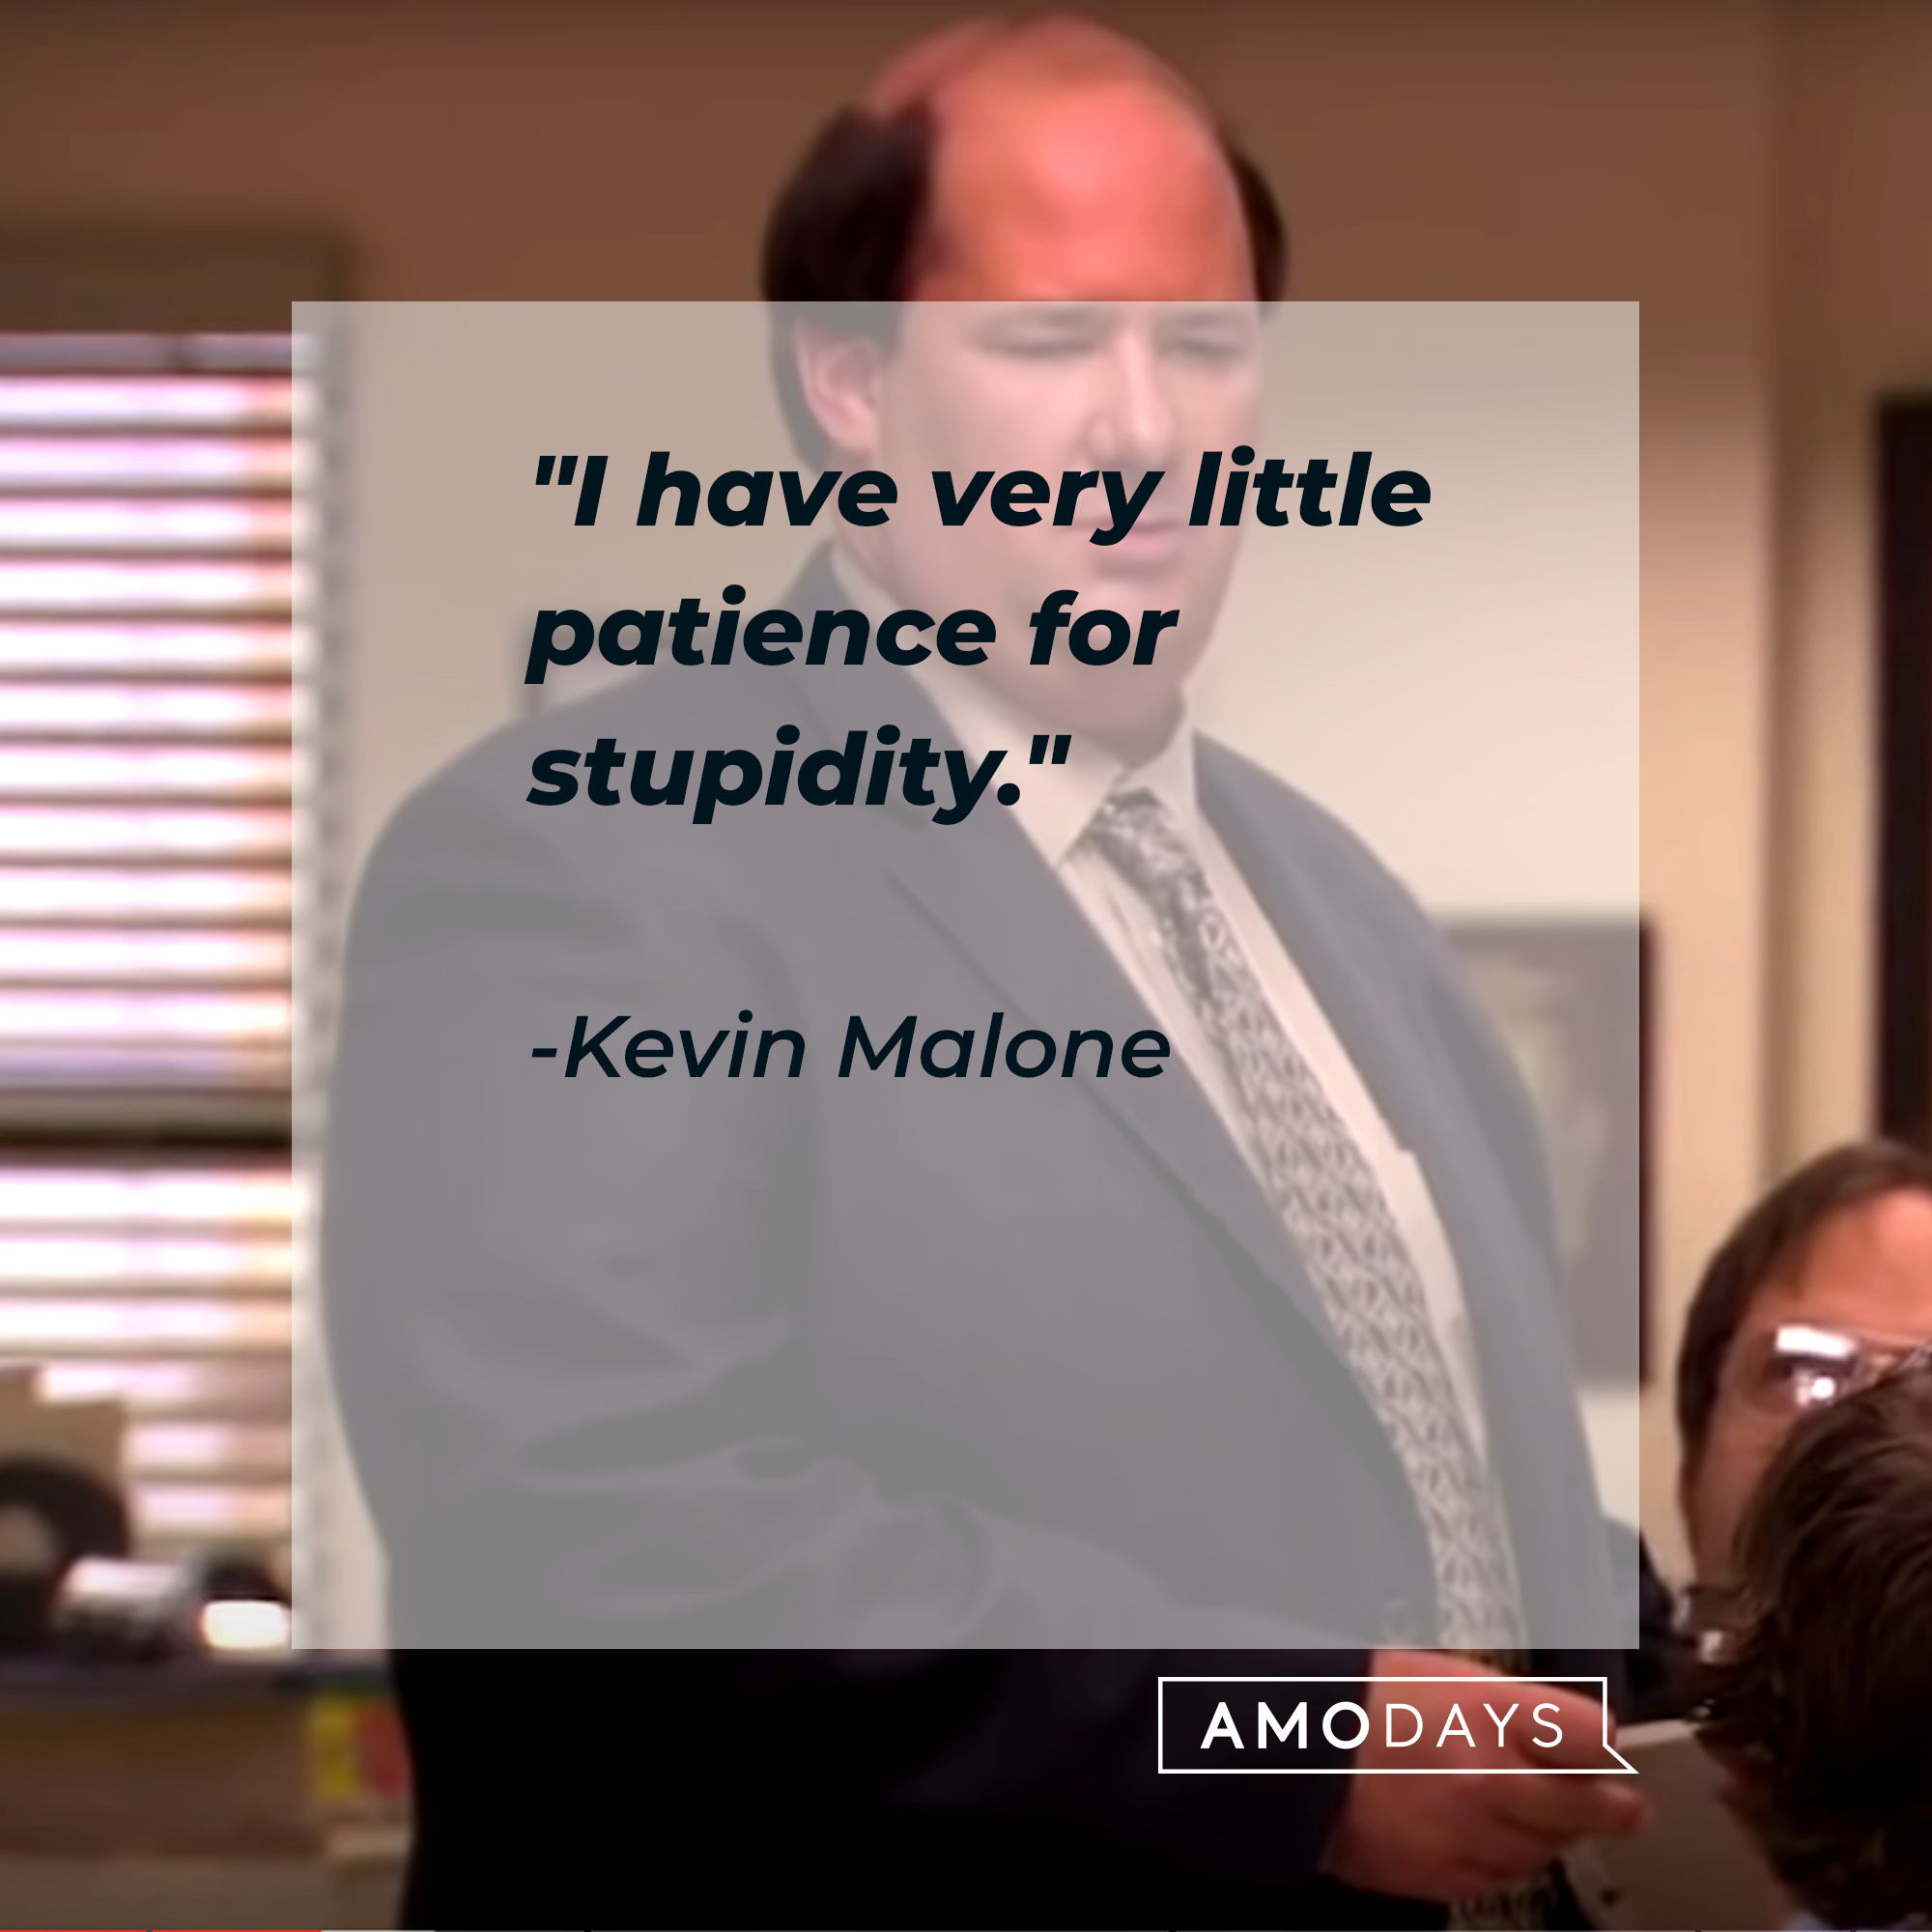 Kevin Malone's quote: "I have very little patience for stupidity." | Source: youtube.com/TheOffice